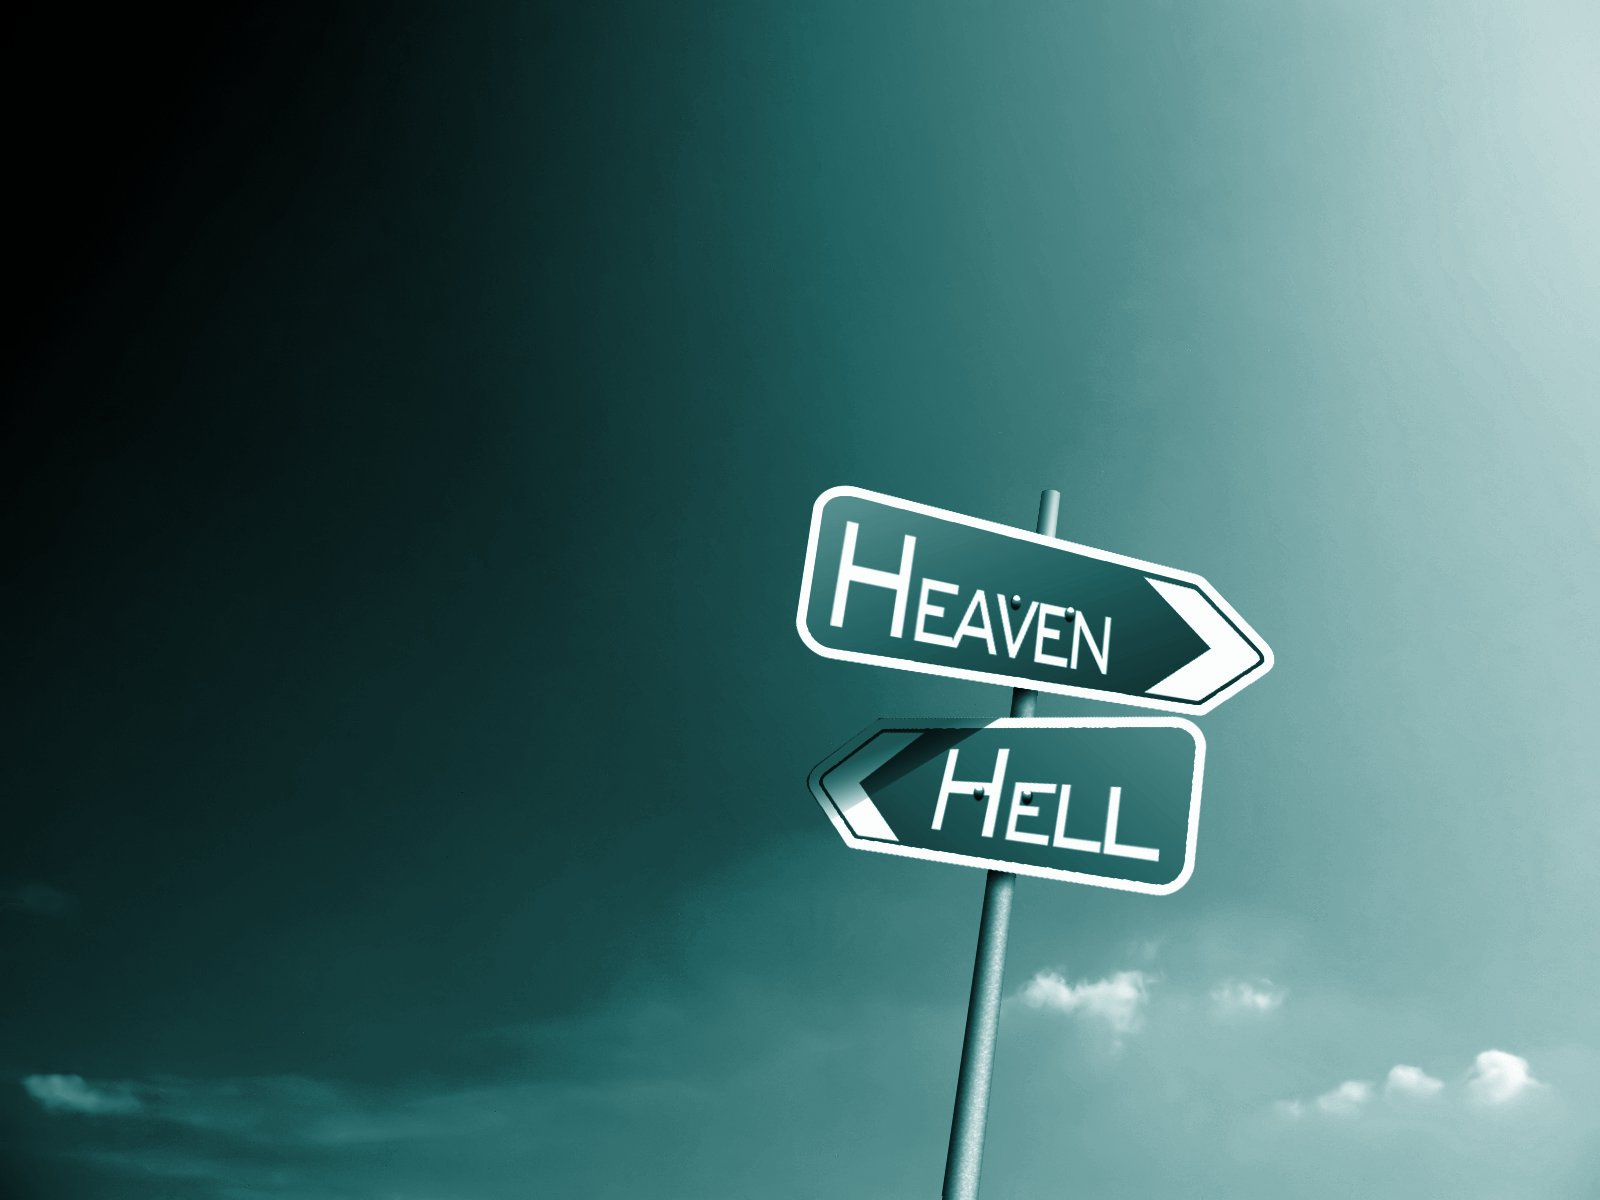 Christian Wallpaper Wallpapers - Two Ways Heaven And Hell - HD Wallpaper 